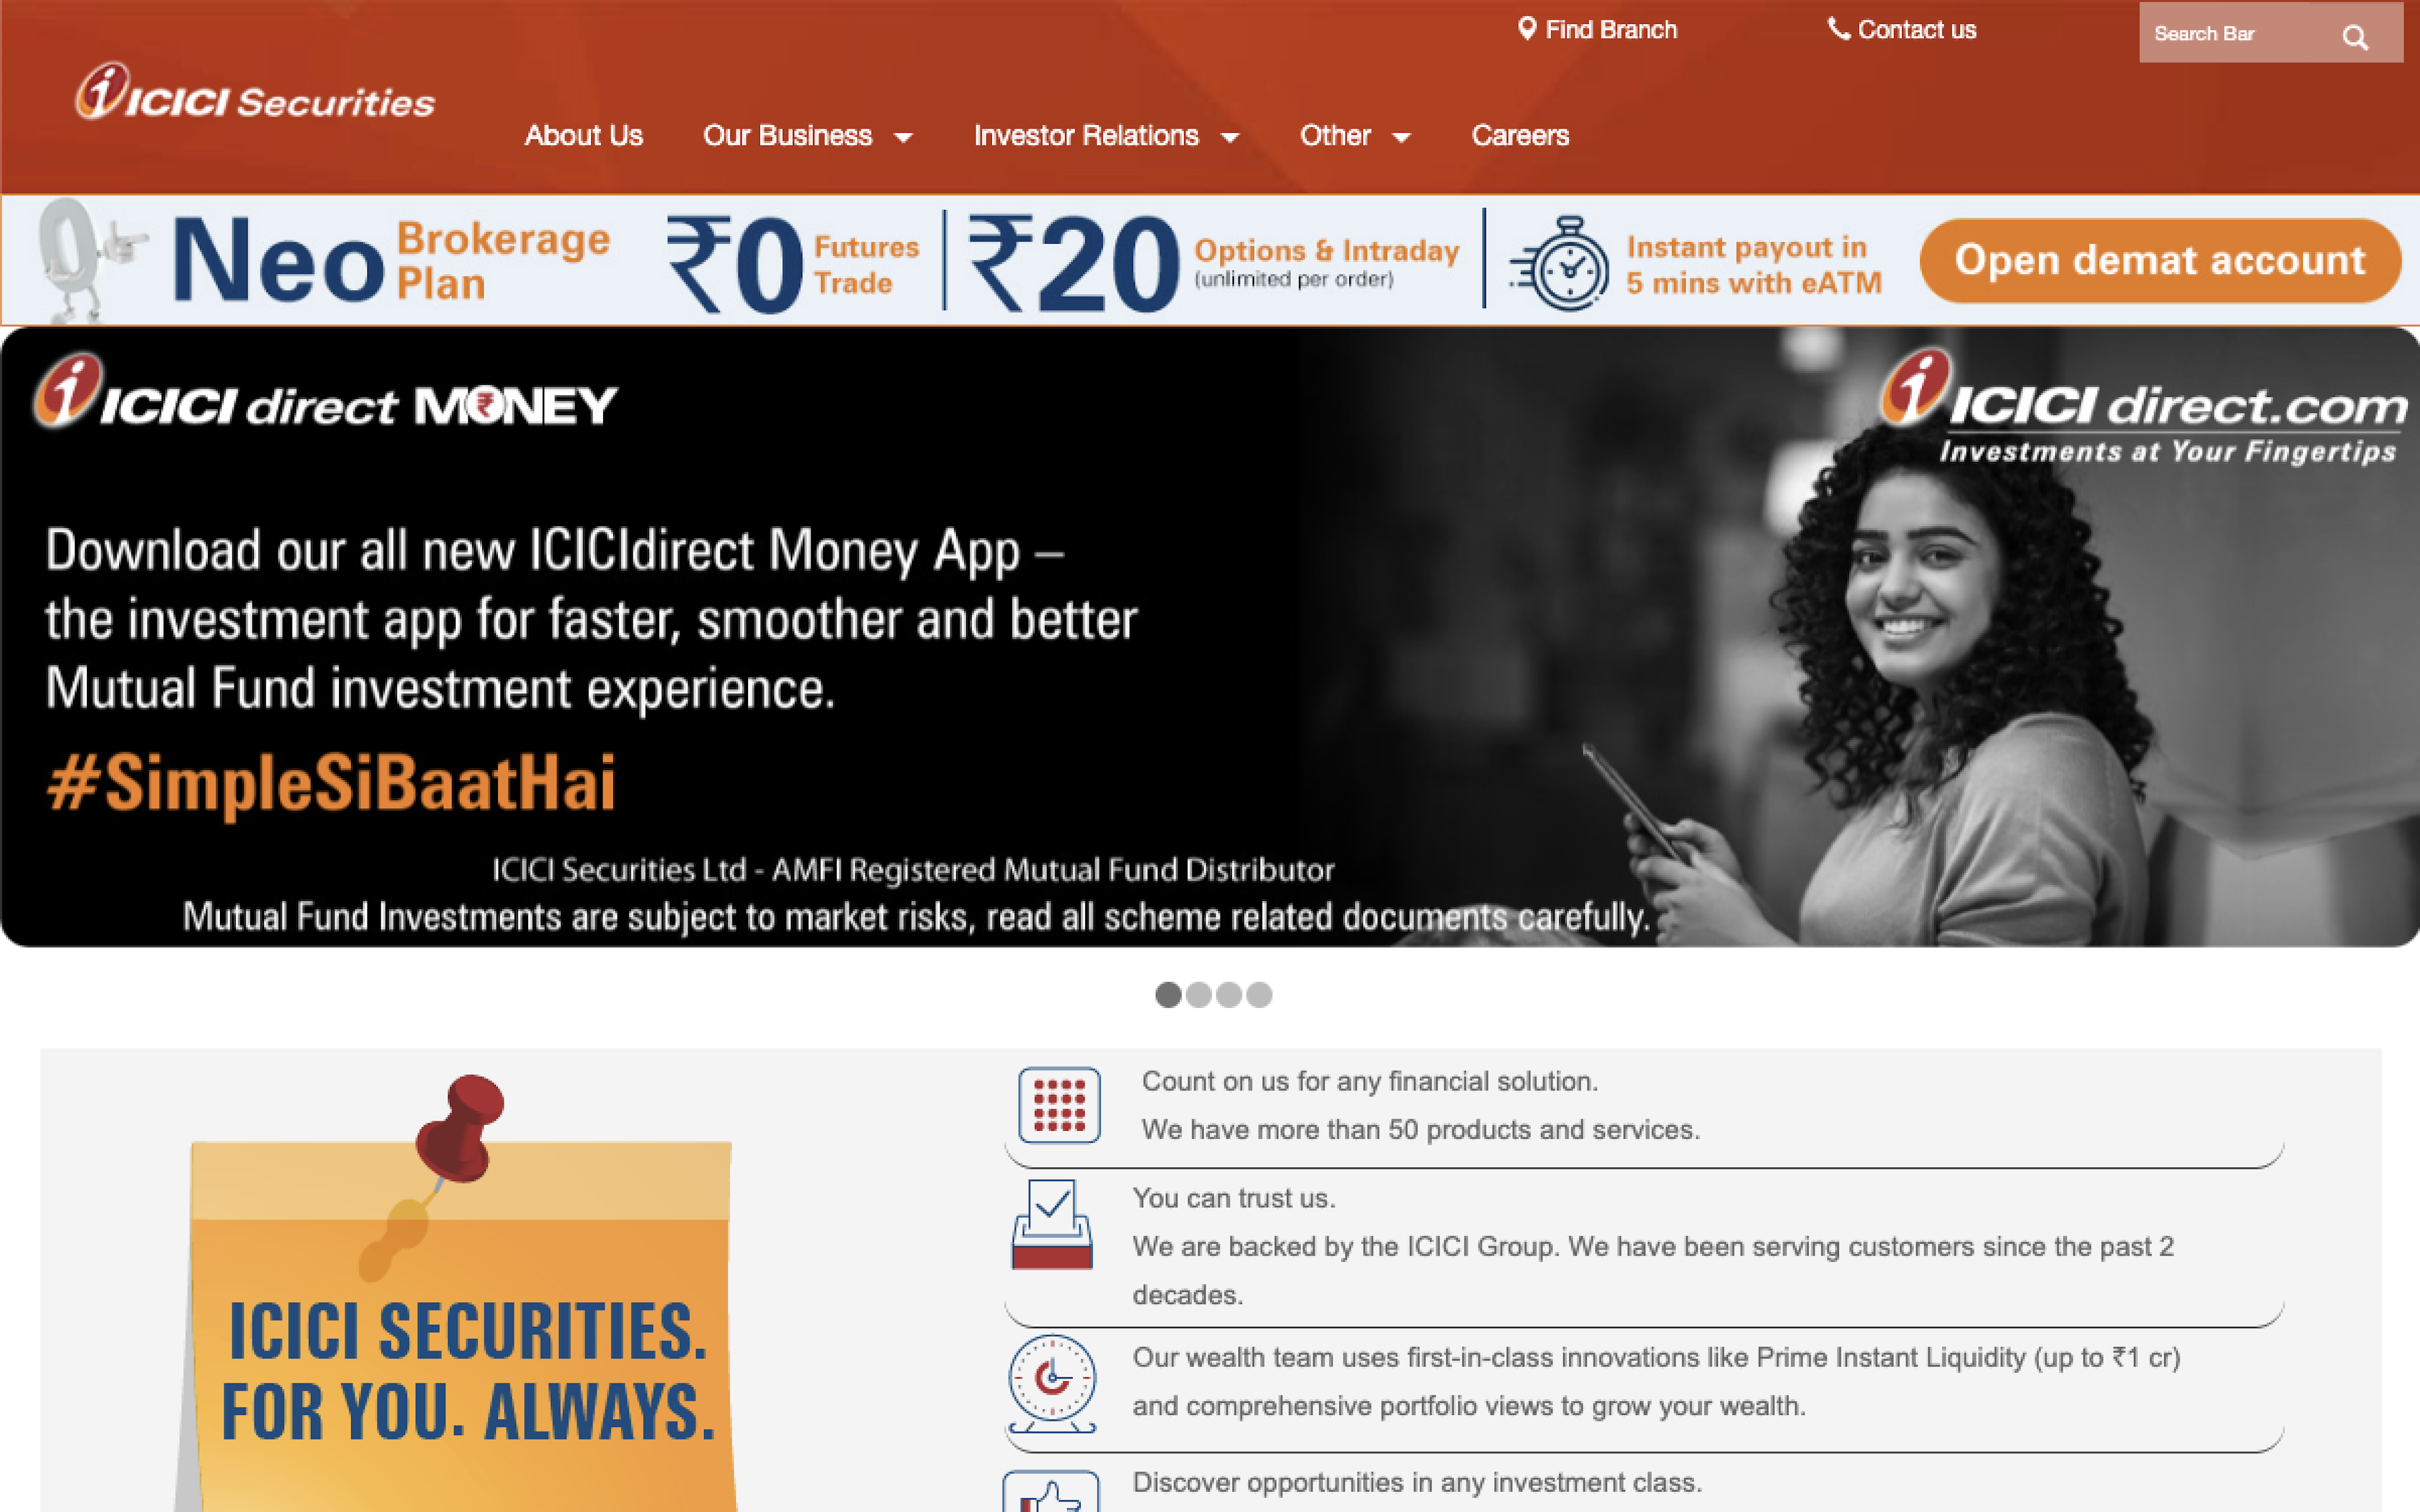 Mobile and web app development for ICICI